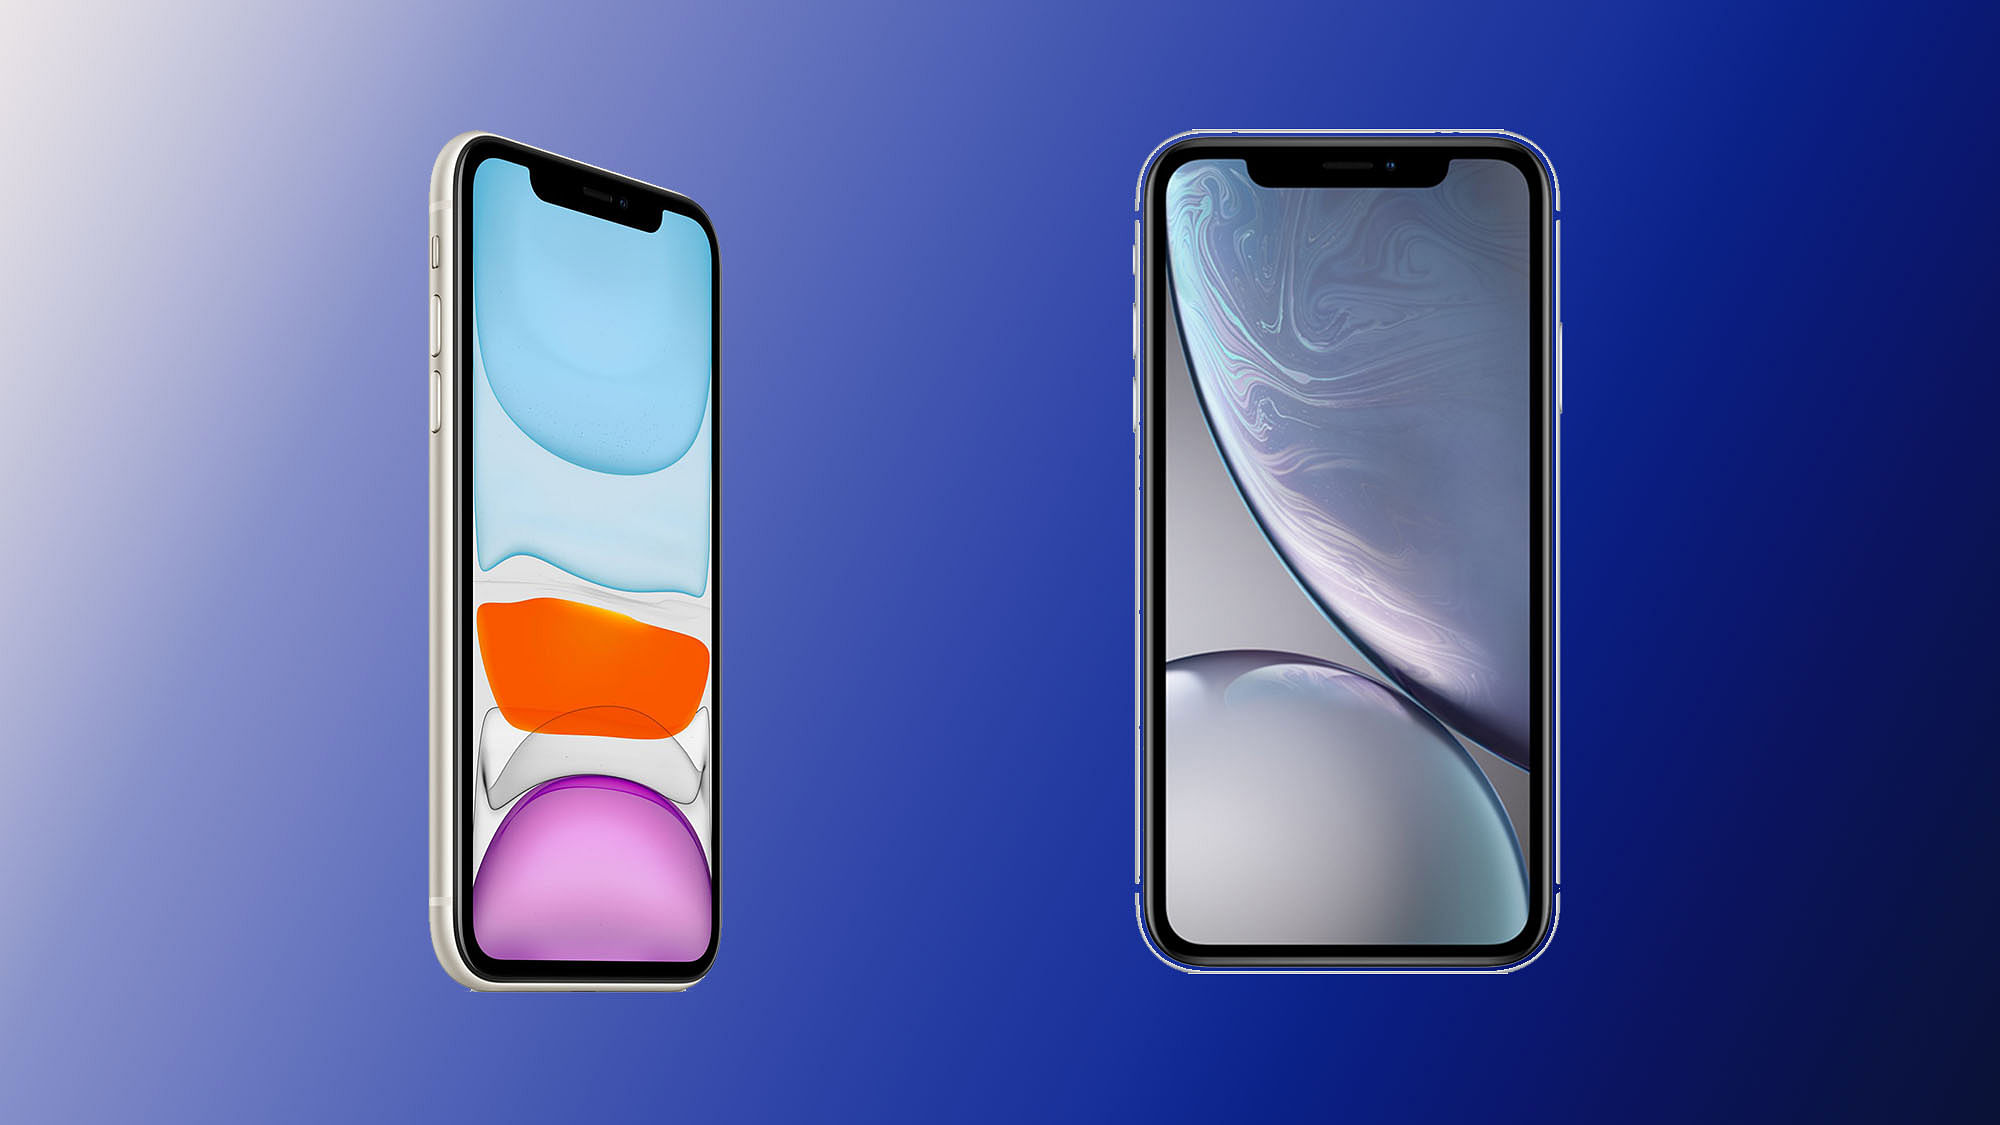 The iPhone 11 (left) and the iPhone XR (right) – both phones’ prices have been reduced after the iPhone 12 was launched, on 13 October.